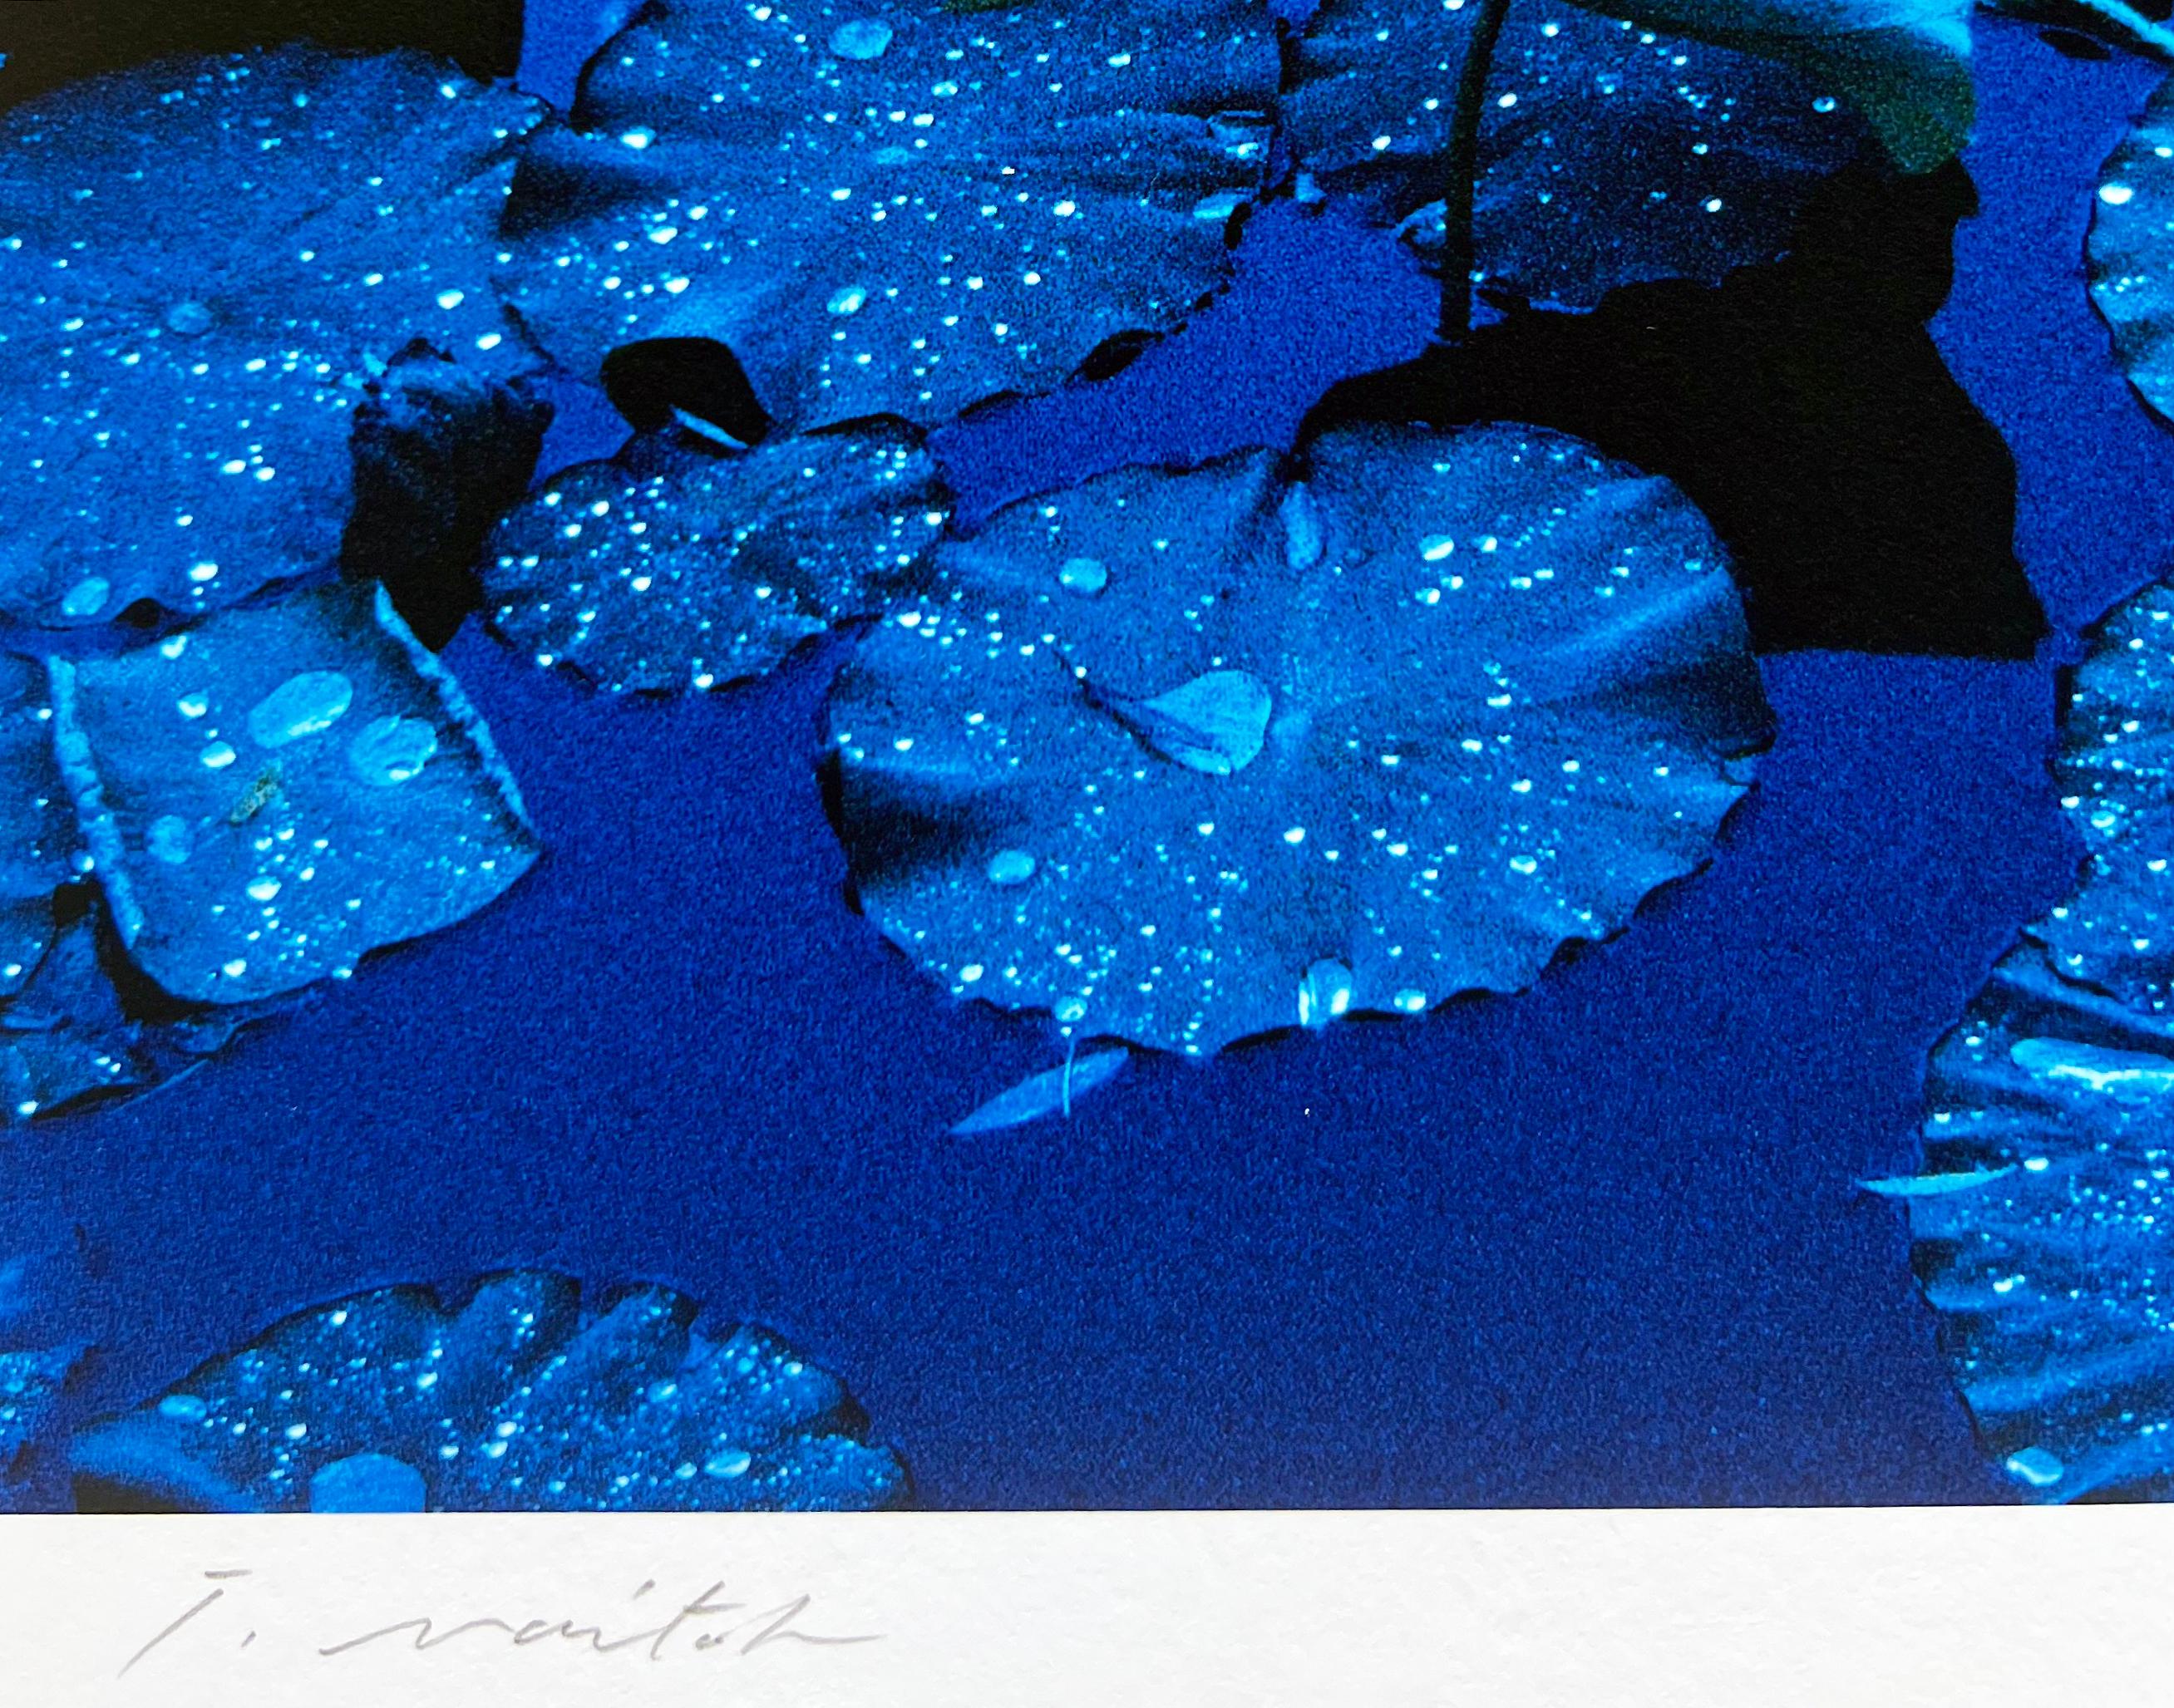 Blue Lotus, 2003 is a contemporary color photograph by Japanese artist Tadayuki Naito. Naito created a series on the blue lotus, a flower of peace and hope. The artist’s desire was to express the intrinsically Japanese aesthetic of embodiment of the